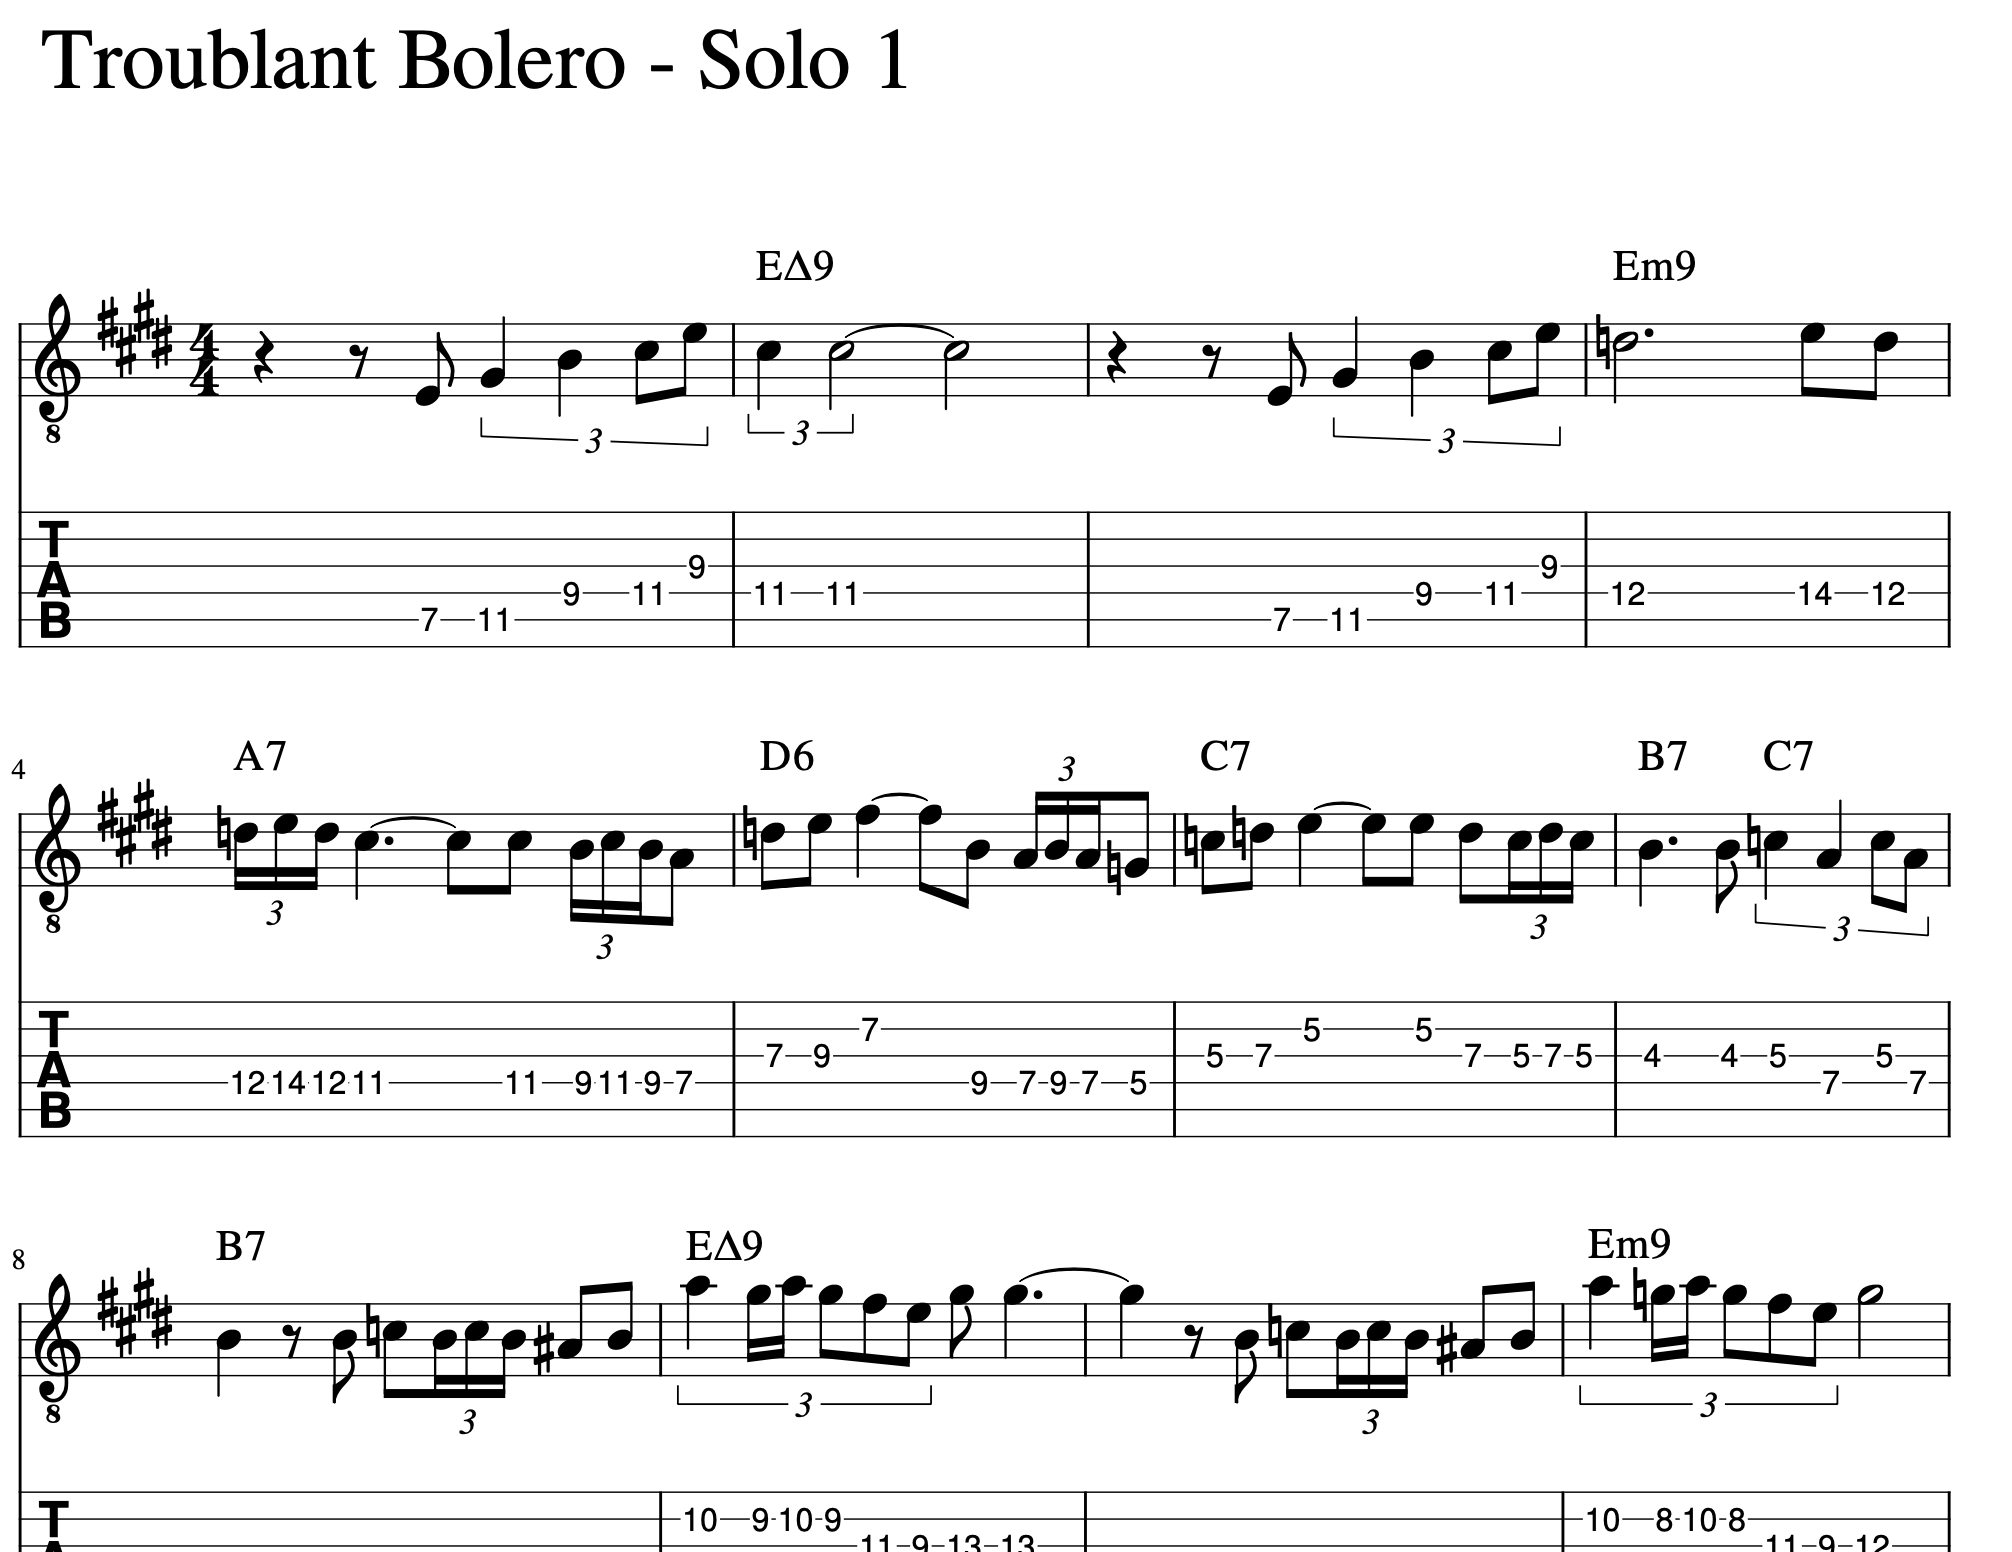 Master The Song - Troublant Bolero - tabs and notes